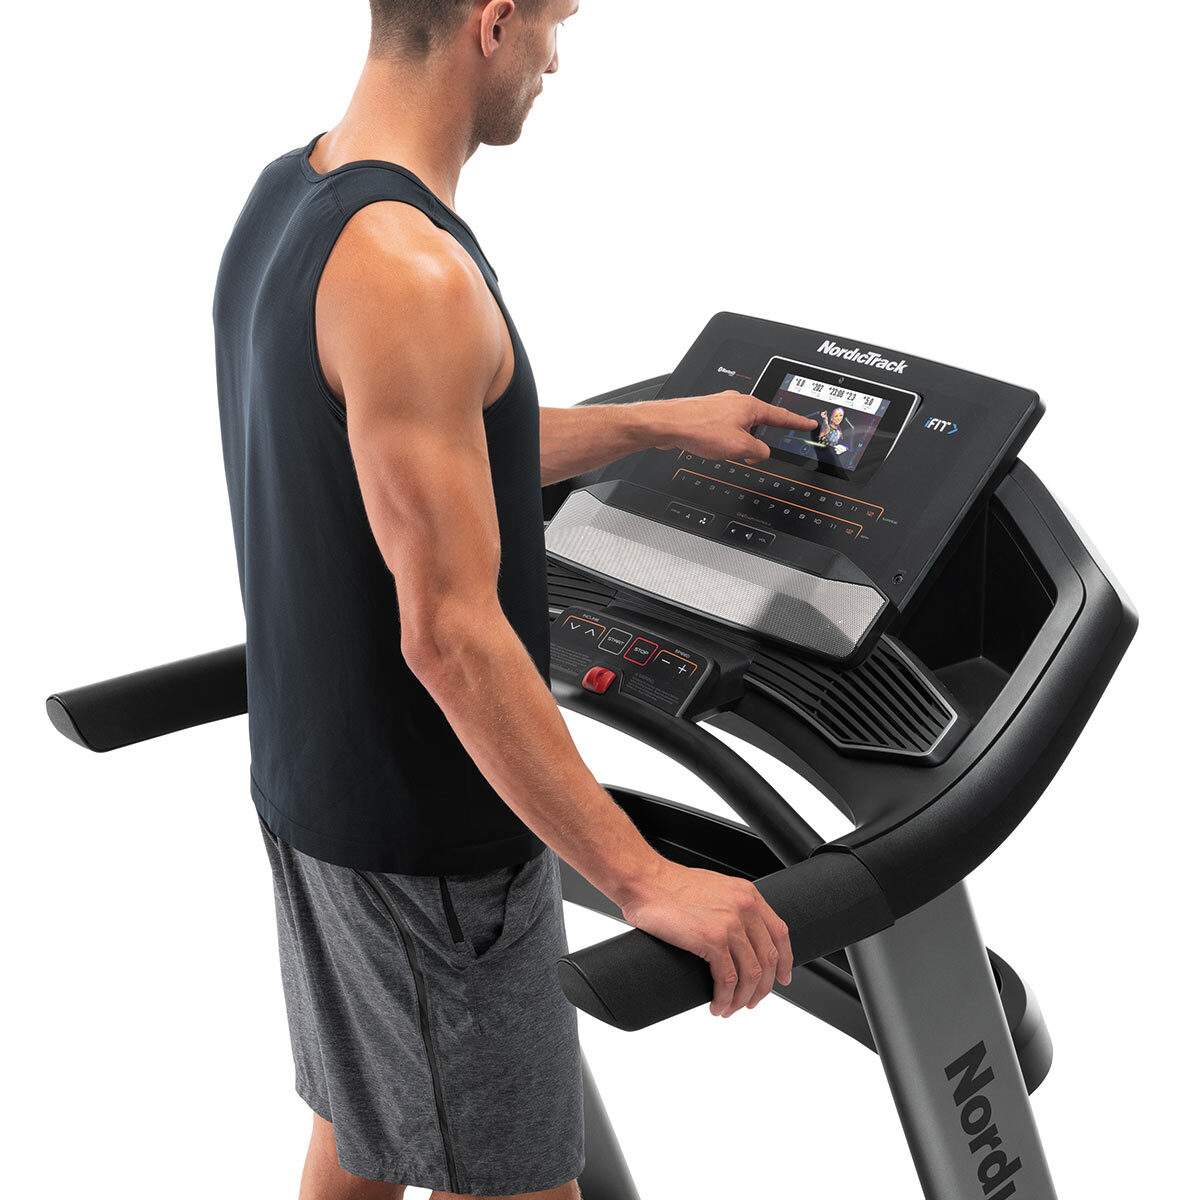 Man using touchscreen display Image for Nordic Track Elite 900 Treadmill